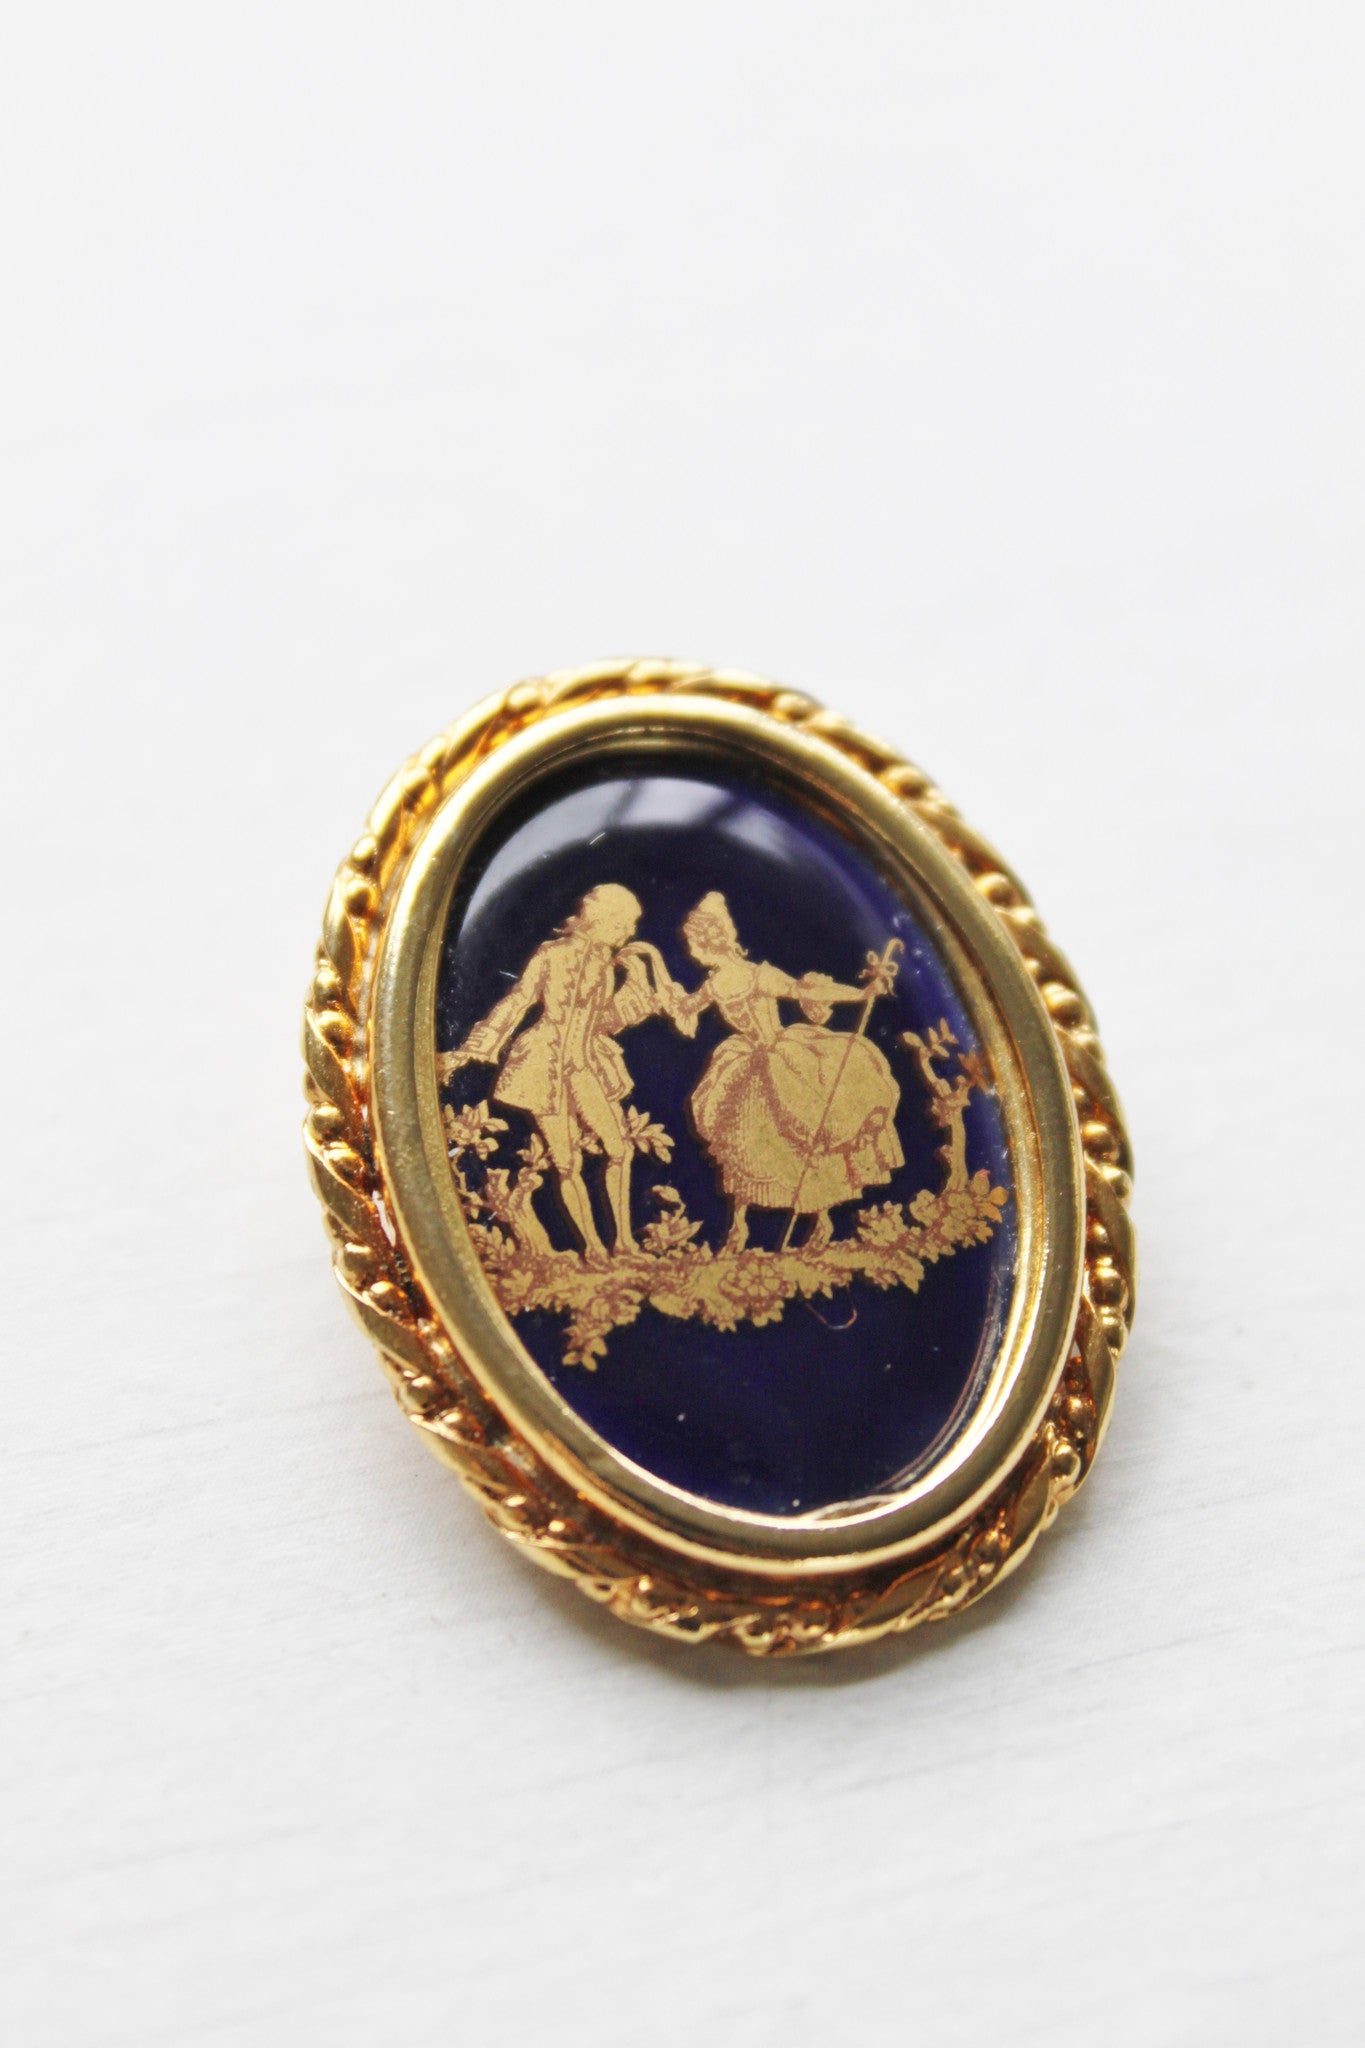 Takes Two to Love Limoges Porcelain Brooch